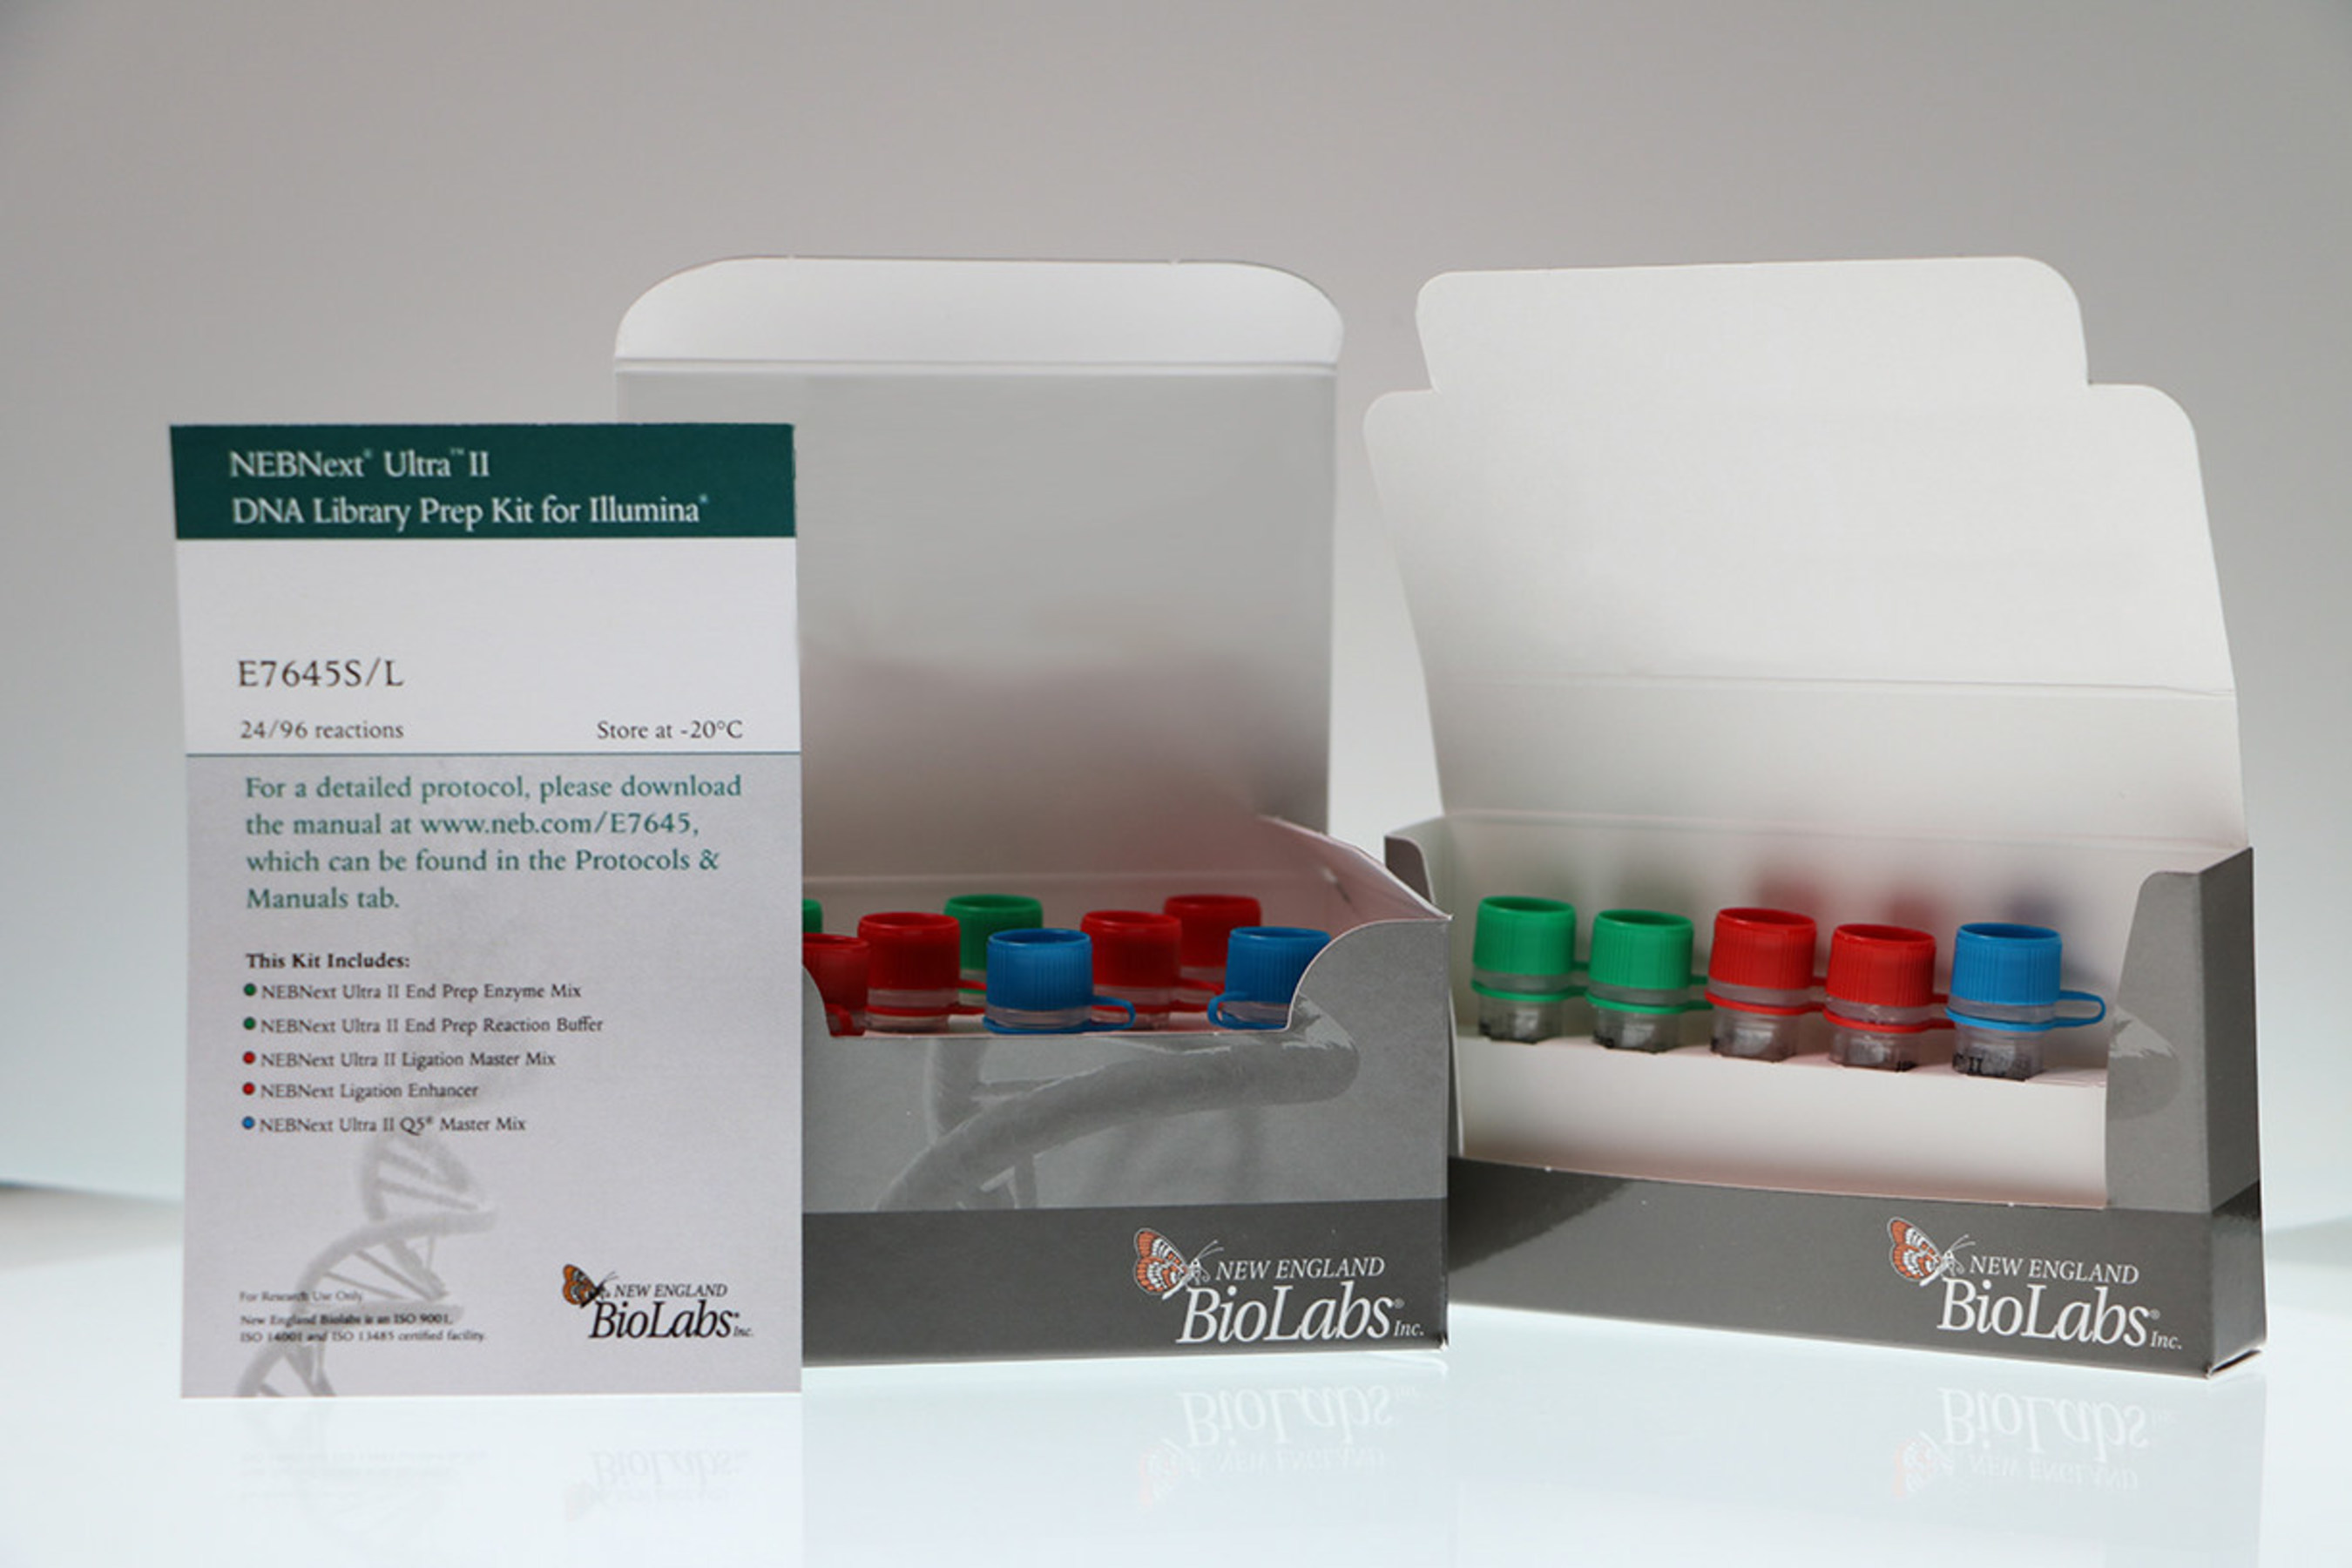 Now available: NEBNext Ultra II DNA Library Prep Kit for the Illumina Platform.